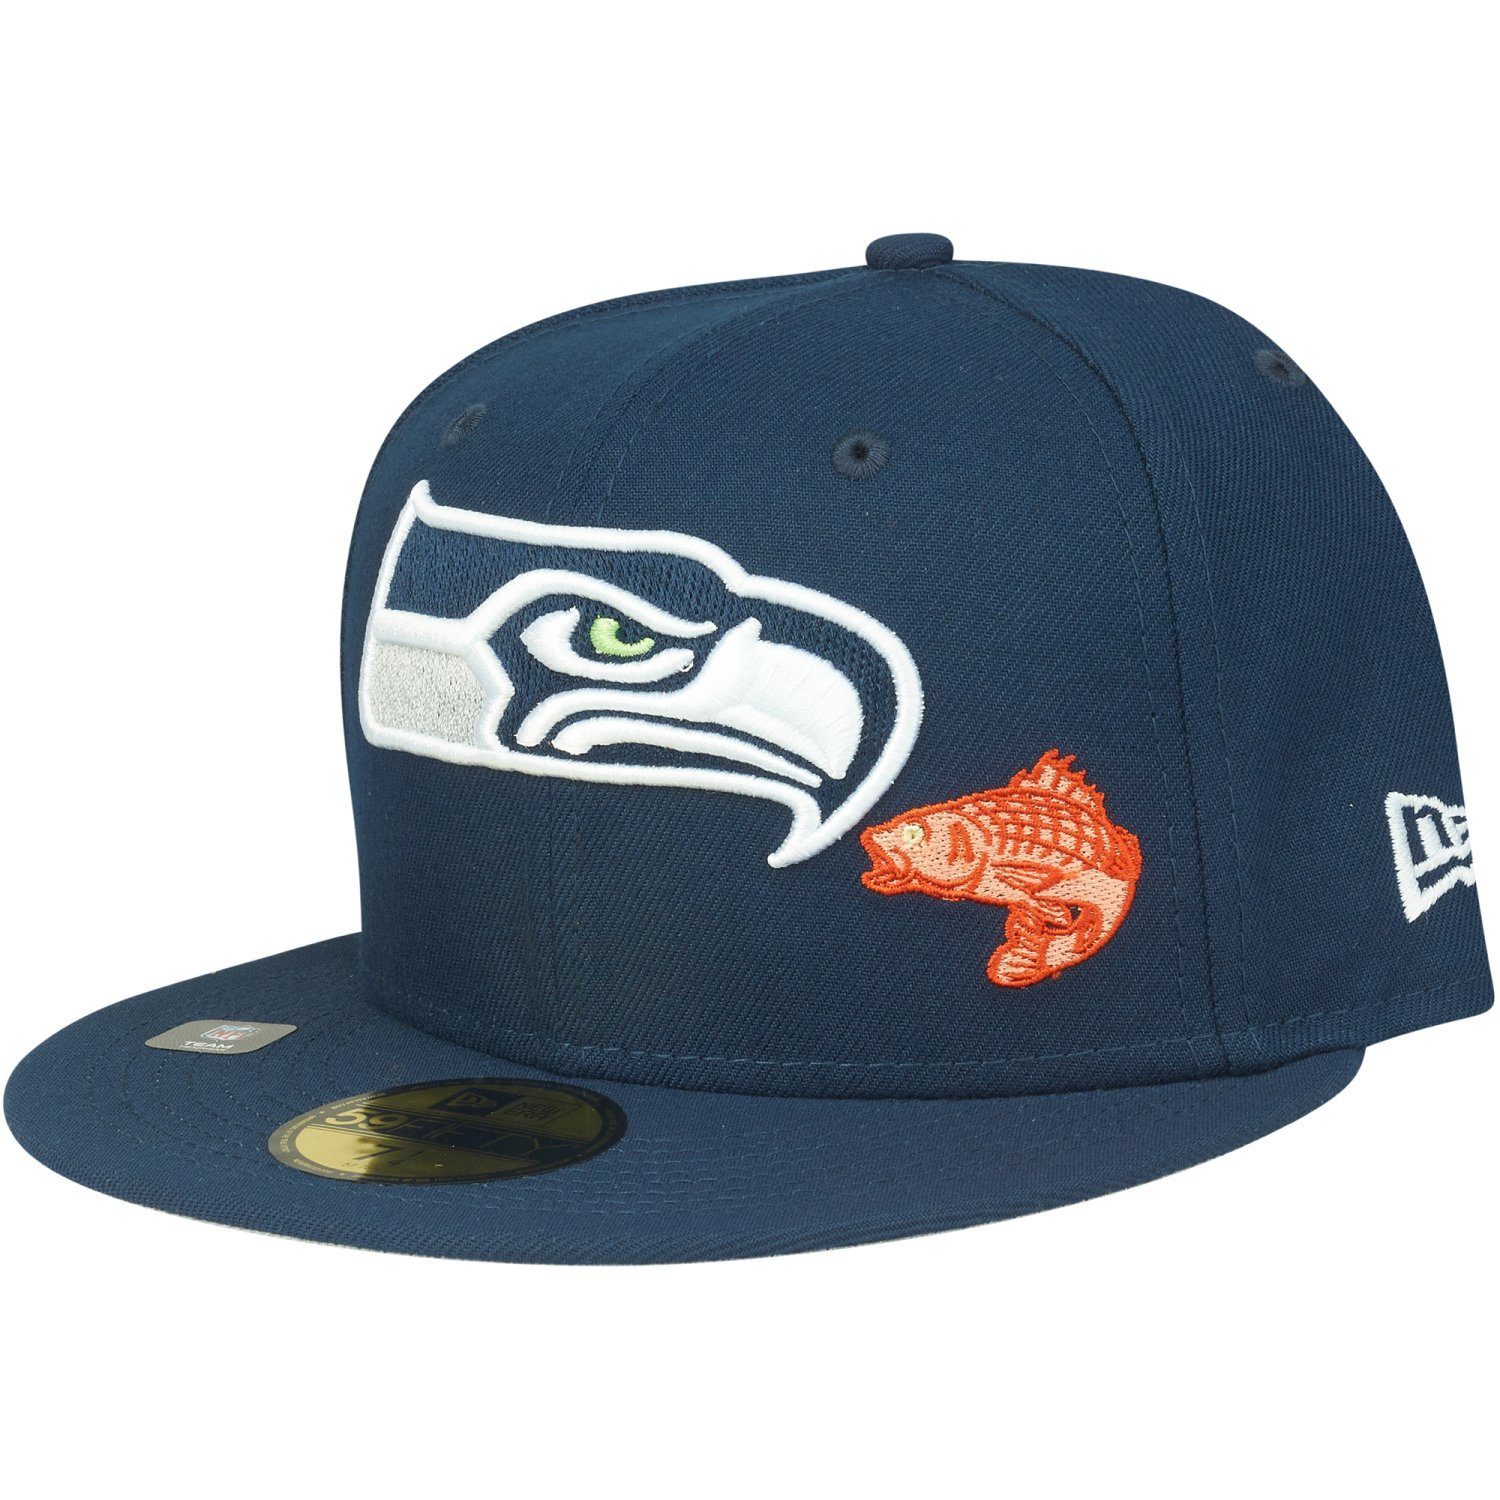 New Era Fitted Cap 59Fifty NFL CITY Seattle Seahawks